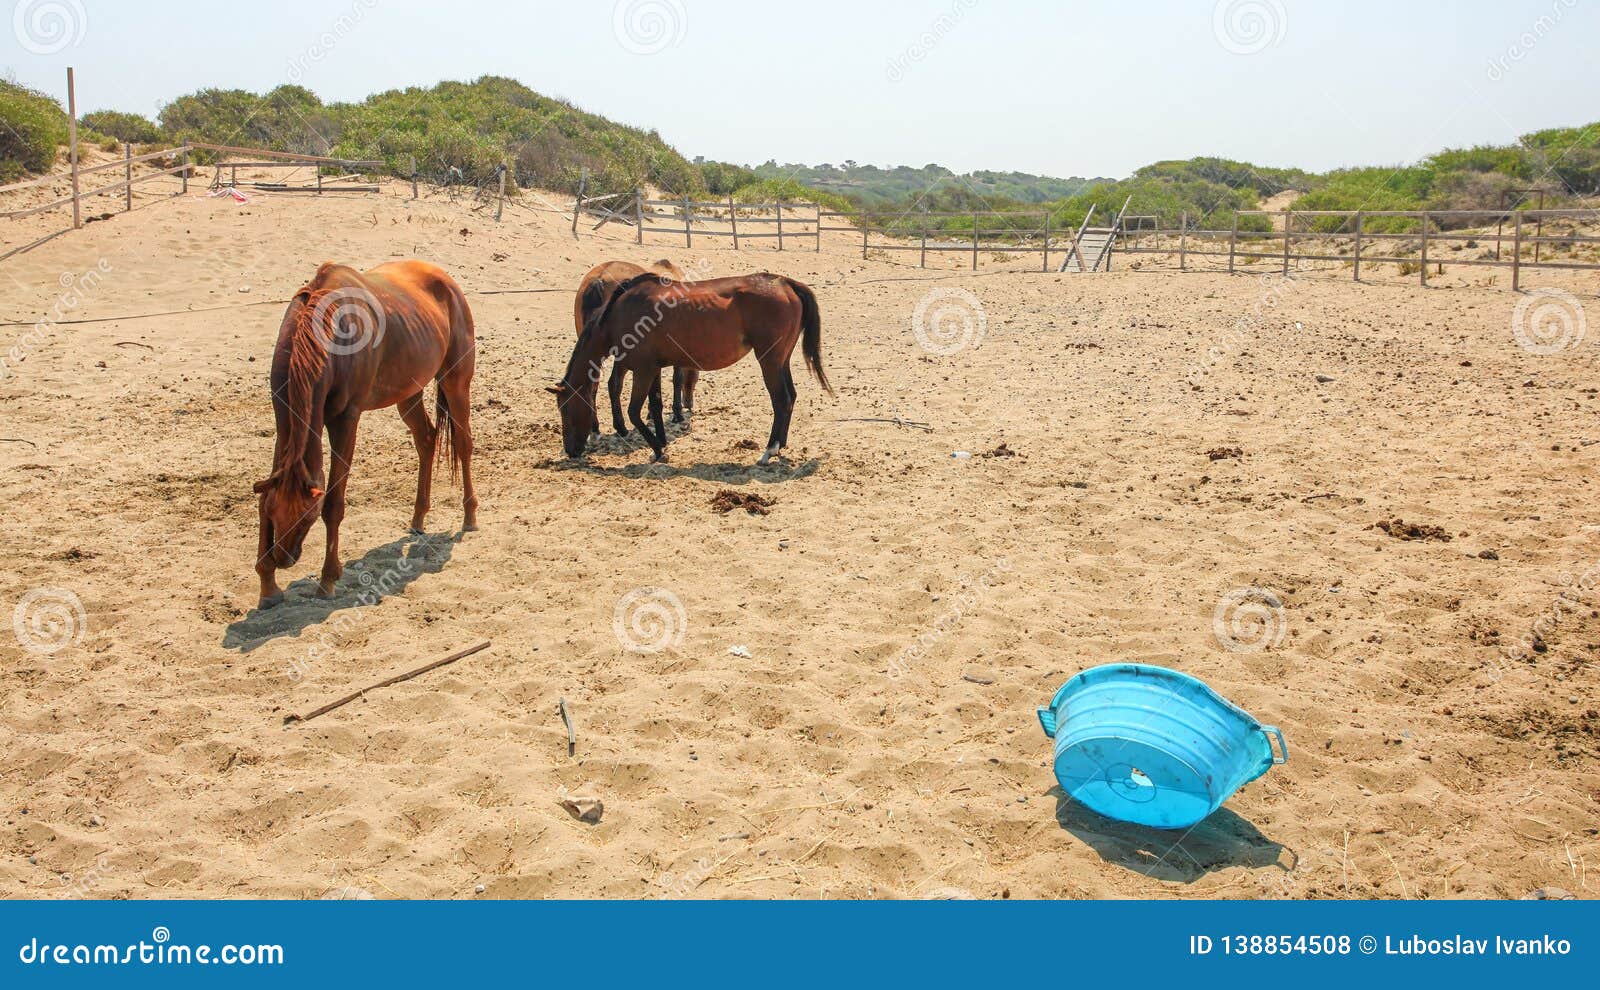 horses at provisional, unkept yard near beach on a hot day, broken blue plastic basin in foreground